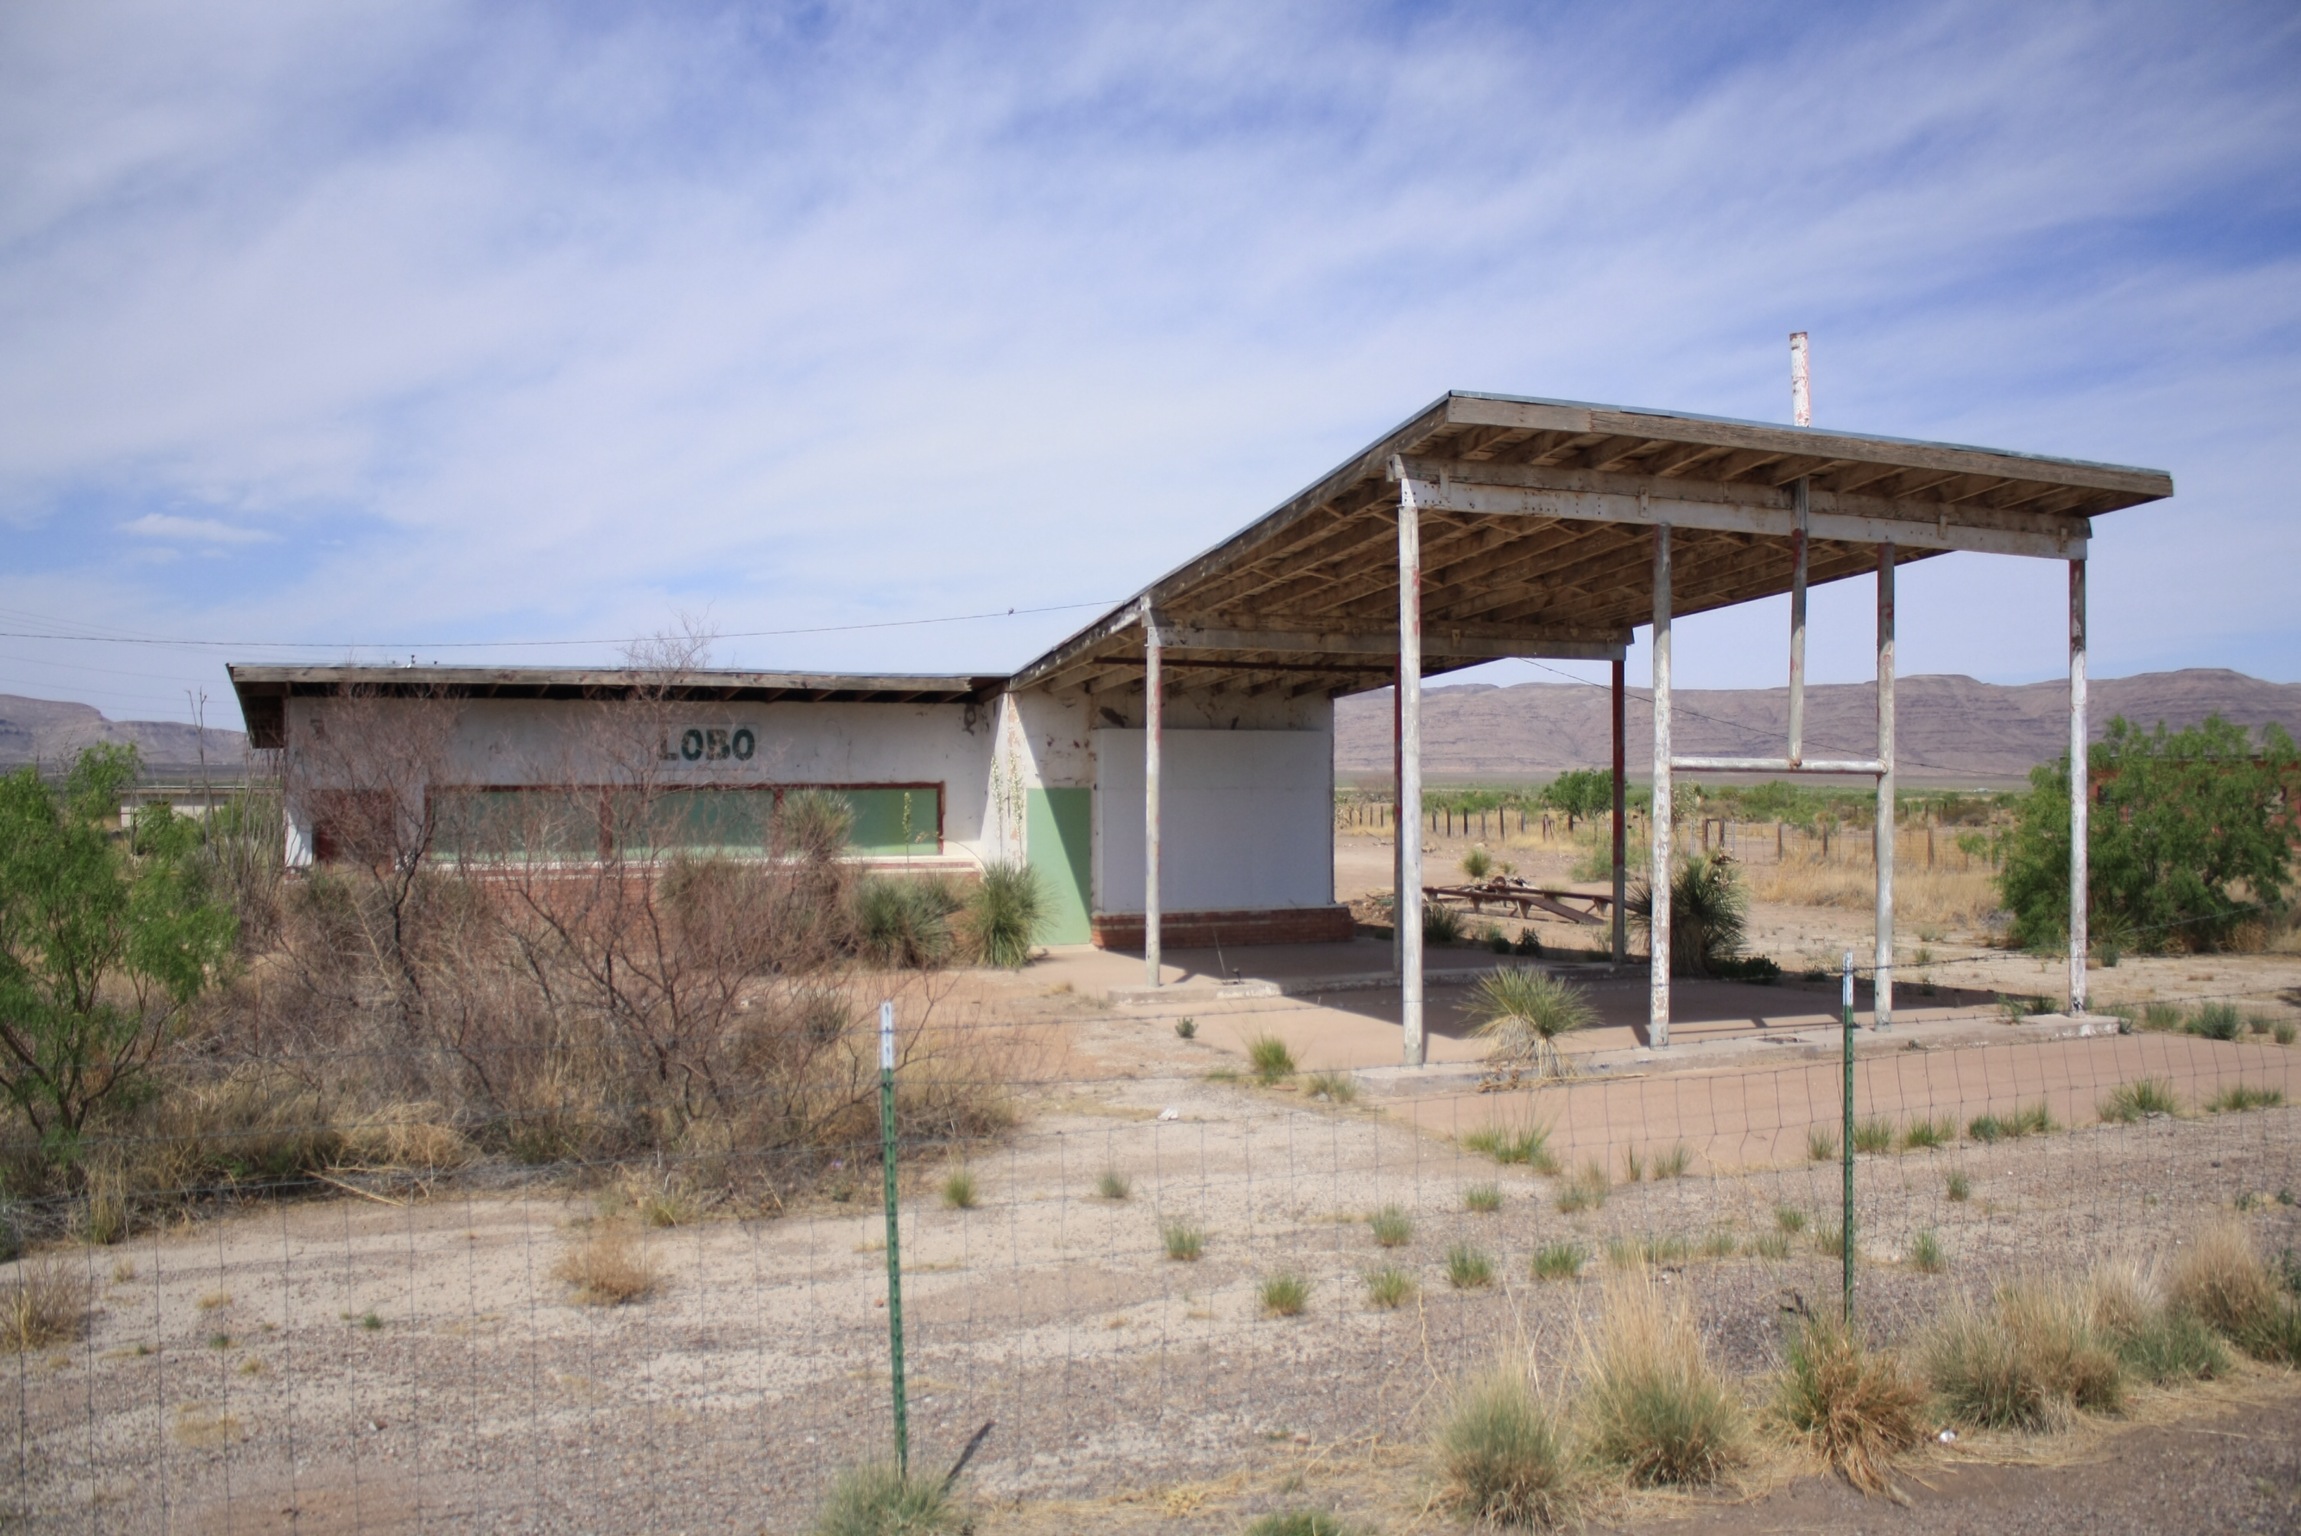 abandoned gas station in lobo texas